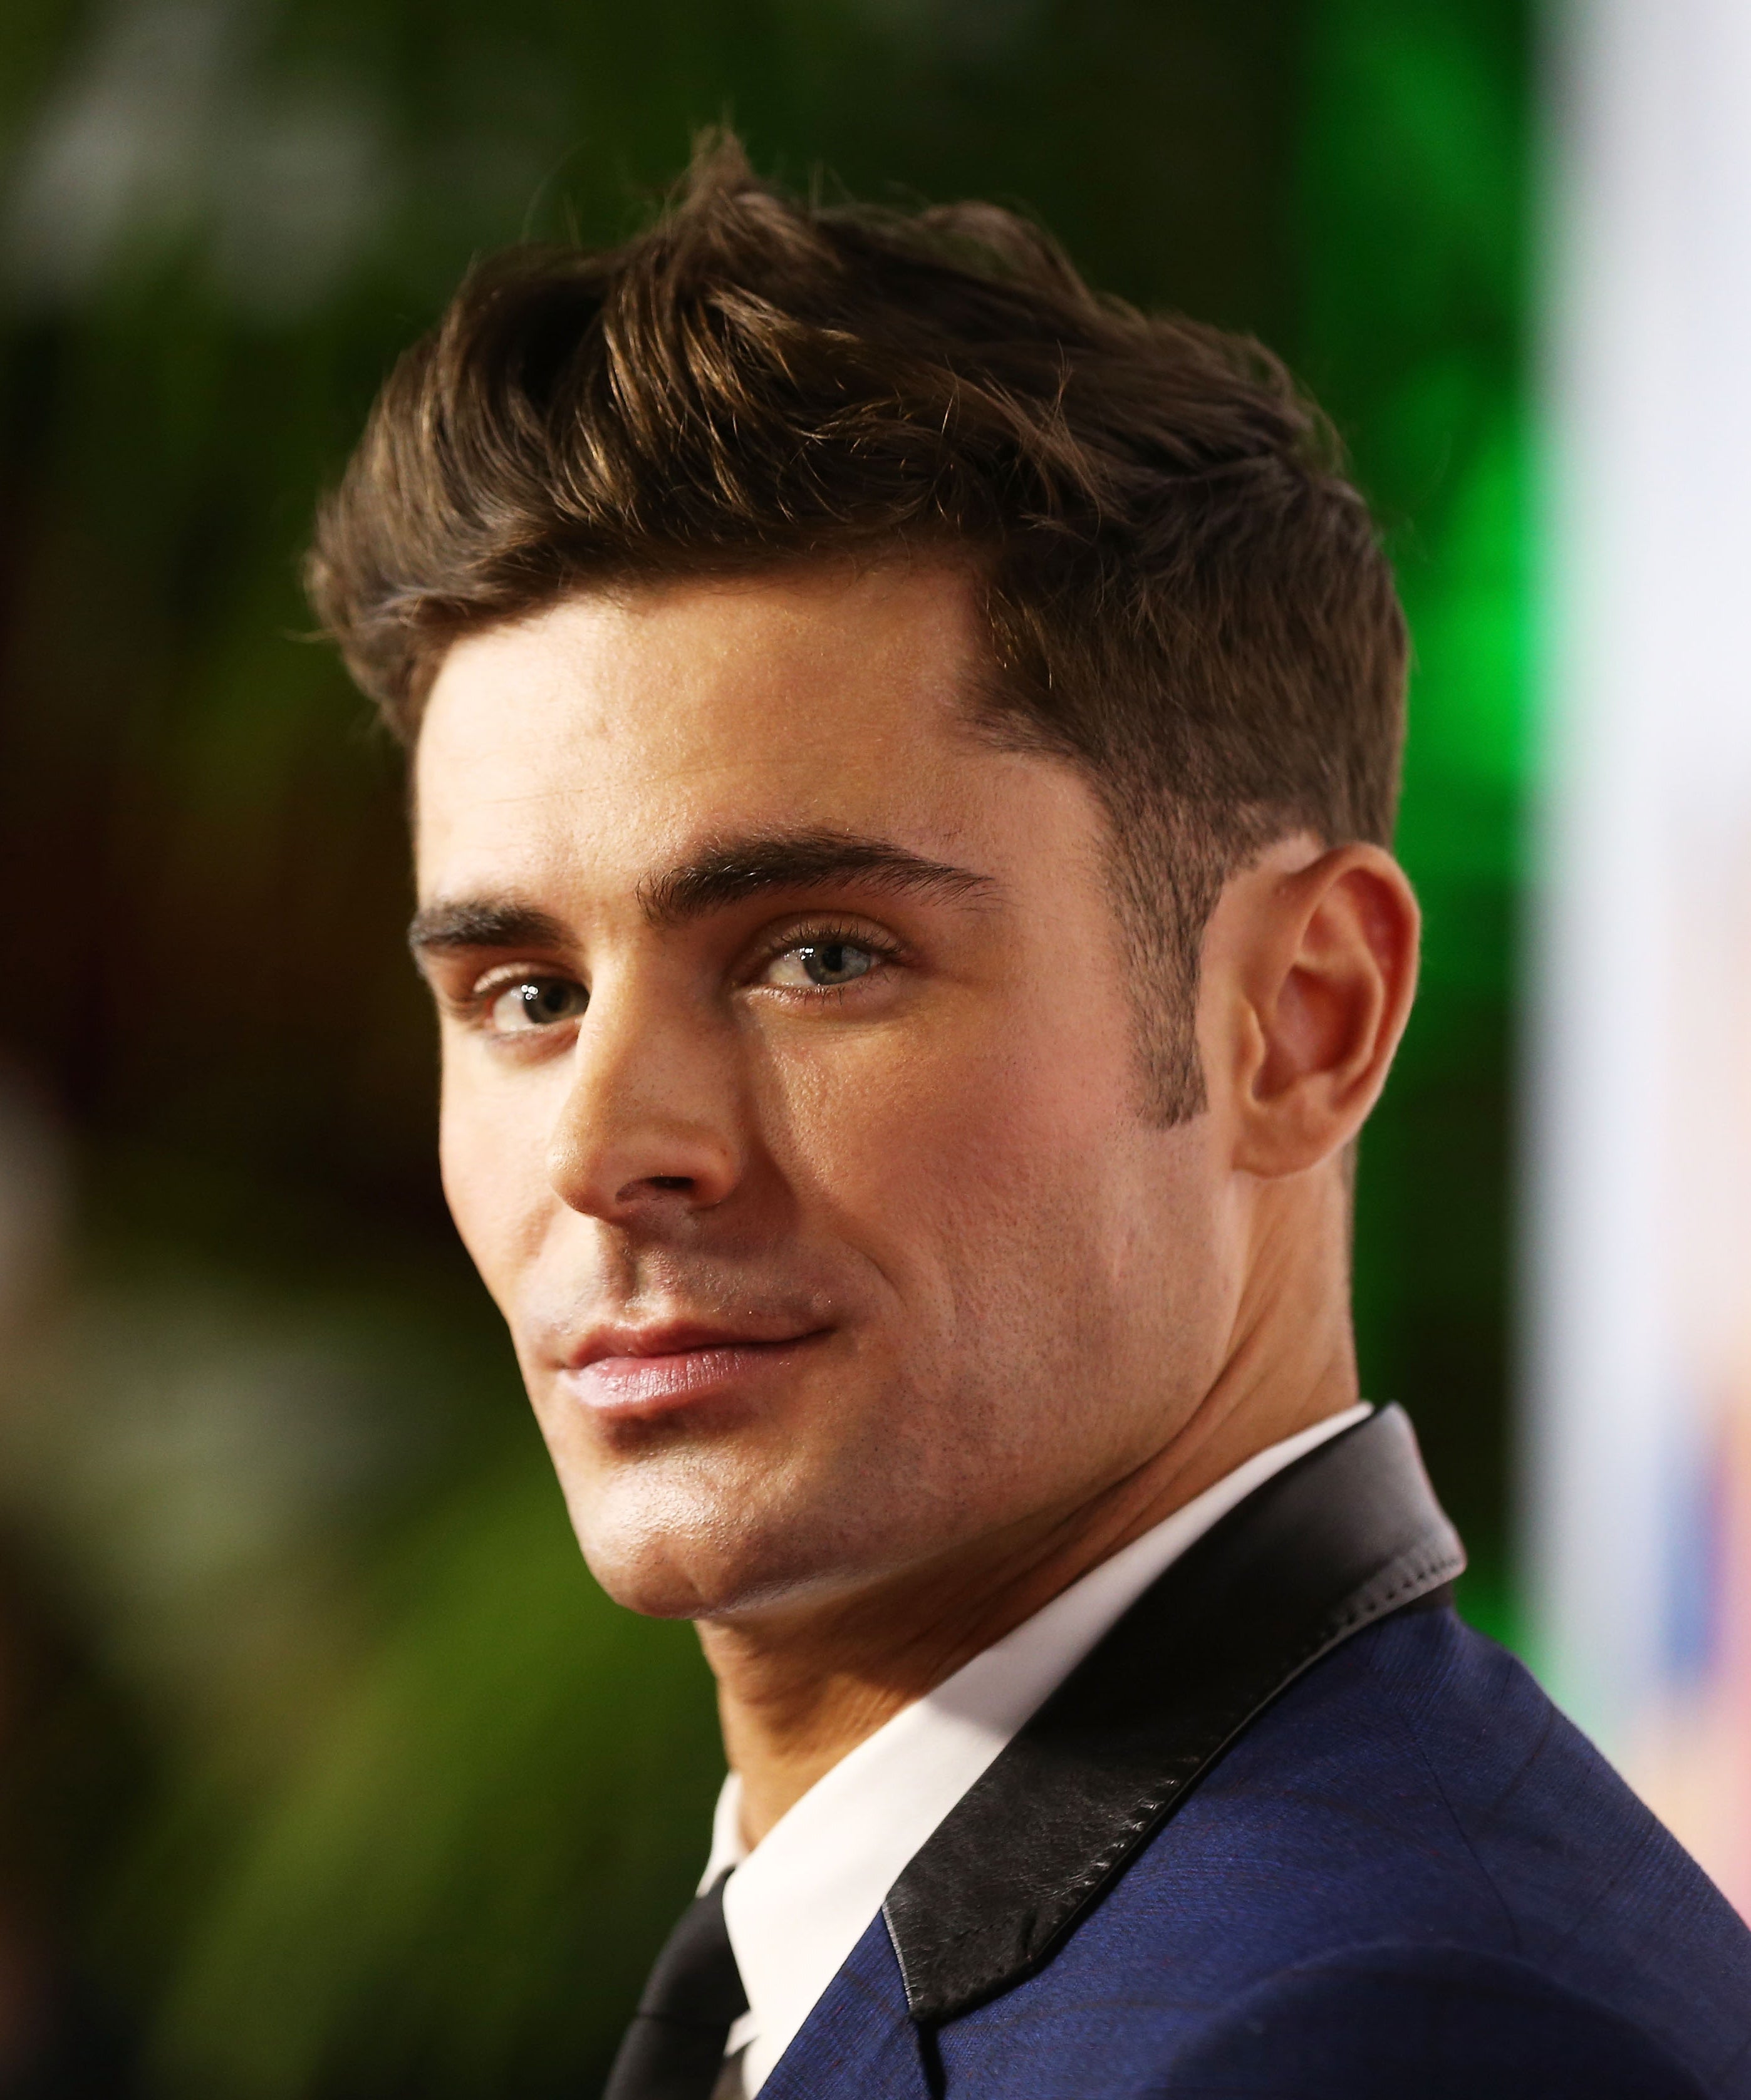 Zac Efron Good Morning Melbourne  Zac Efron  Just Jared Celebrity  News and Gossip  Entertainment